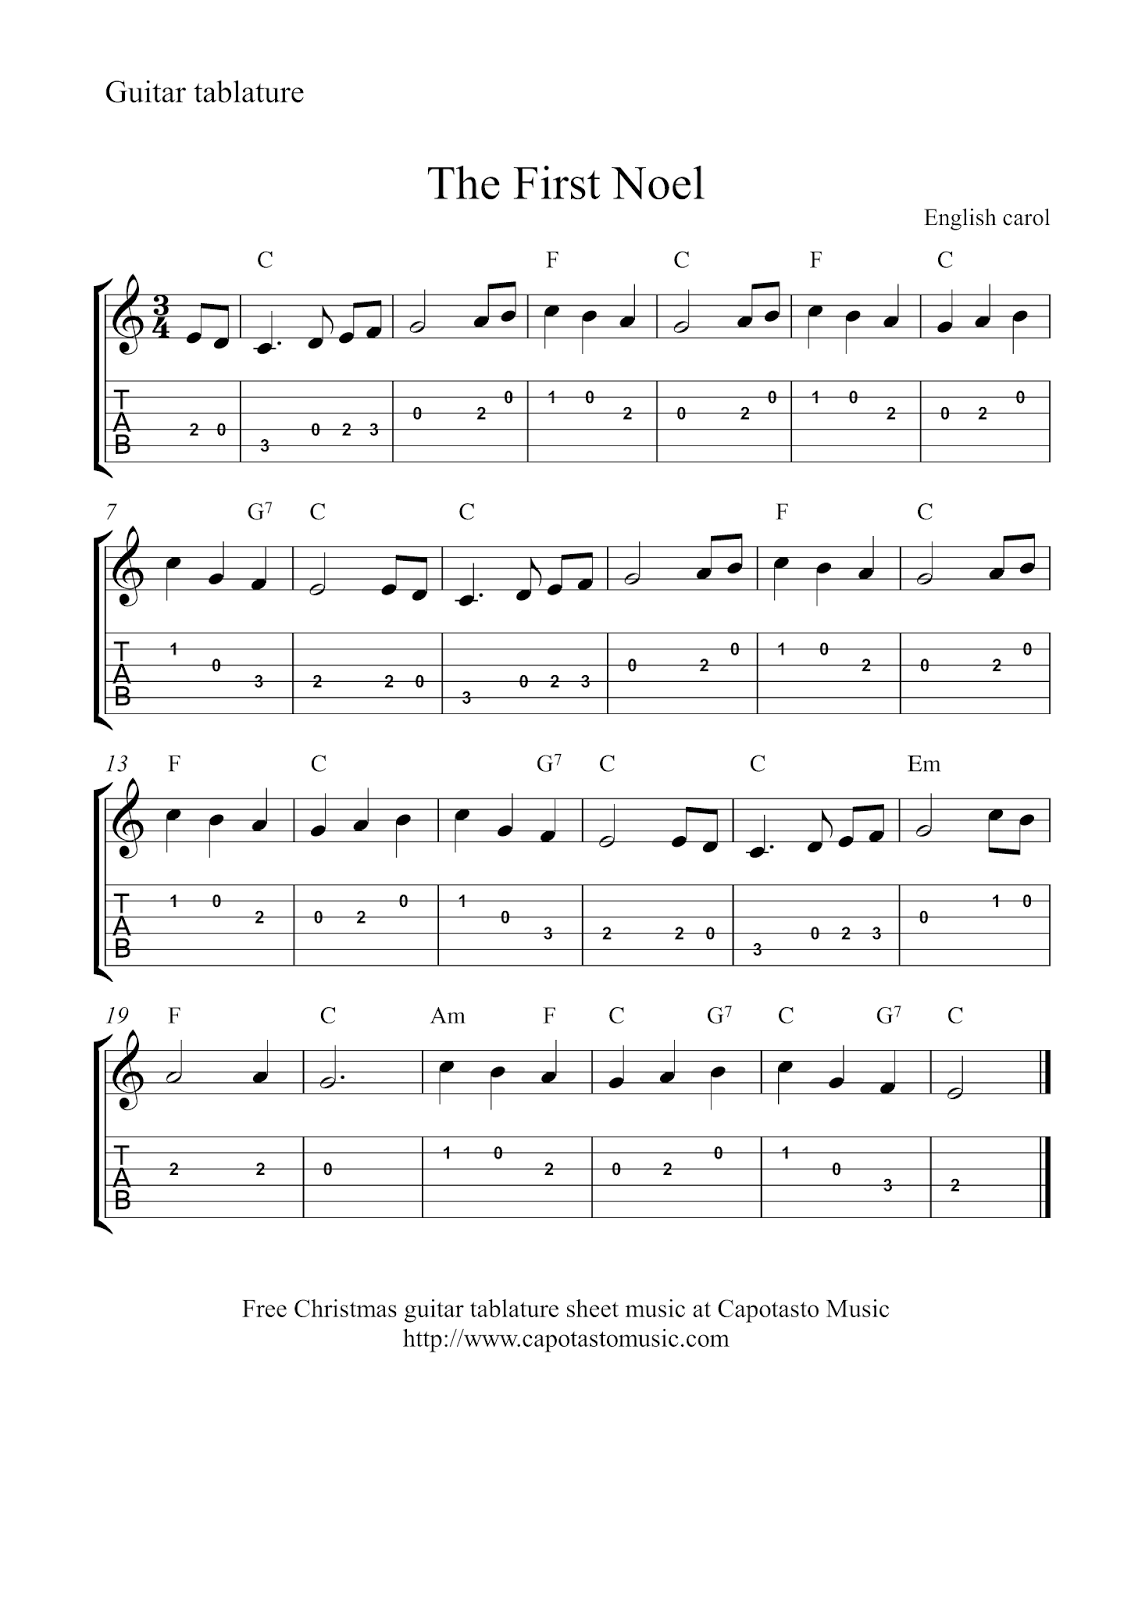 Free Guitar Tab Christmas: The First Noel with regard to Free Printable Guitar Music